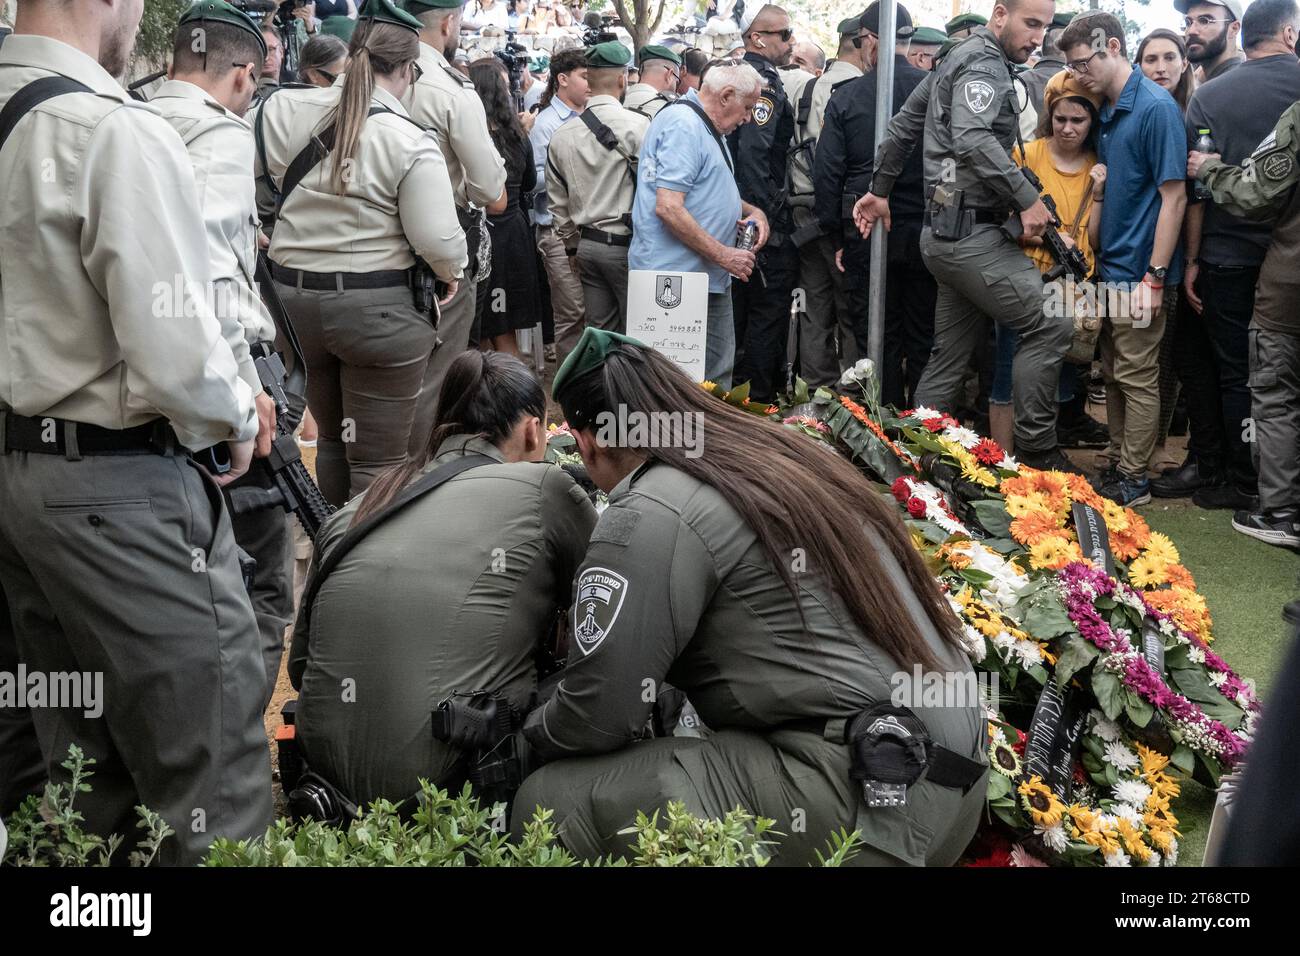 Jerusalem, Israel. 9th November, 2023. American born Israeli Border Policewoman, Rose Ida Lubin, 20, is brought to rest at the Mount Herzl Military Cemetery in the Israel Police plot. Lubin was killed in a stabbing attack near the Old City of Jerusalem on 6th November, 2023, by a 16 year old male from the east Jerusalem neighborhood of Issawiya. Lubin grew up in the Atlanta, Georgia, suburb of Dunwoody before moving to Israel in 2021 and living in Kibbutz Saad, a community on the Gaza border. She volunteered for draft into the IDF as a lone soldier in 2022 and was stationed in Jerusalem's Old Stock Photo